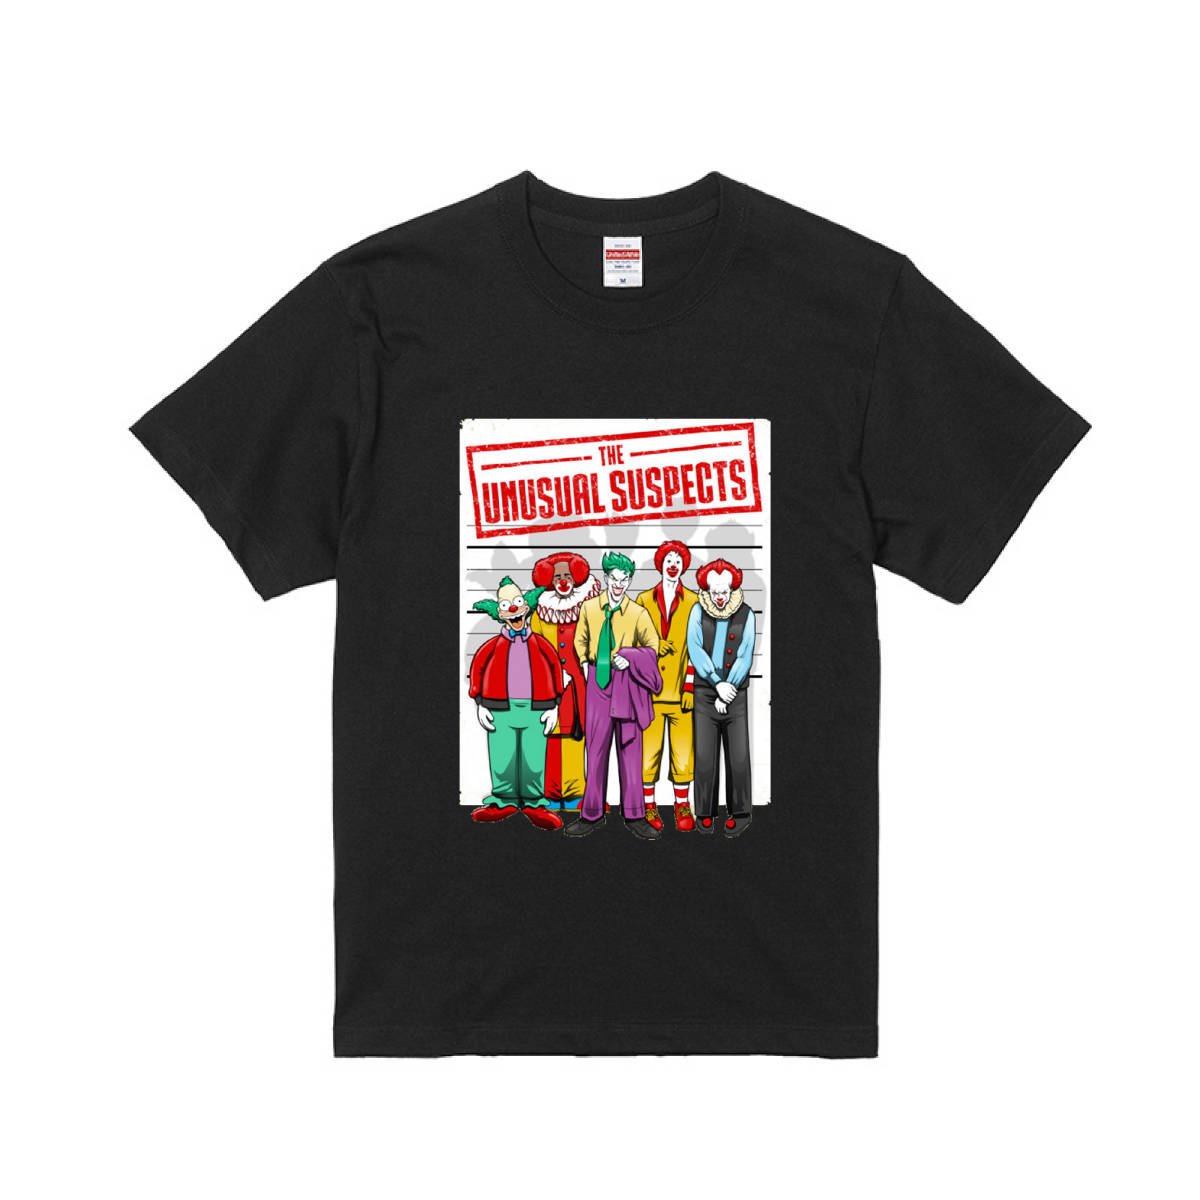 Tシャツ】 『The Unusual Suspects』 The Usual Suspects ユージュアル